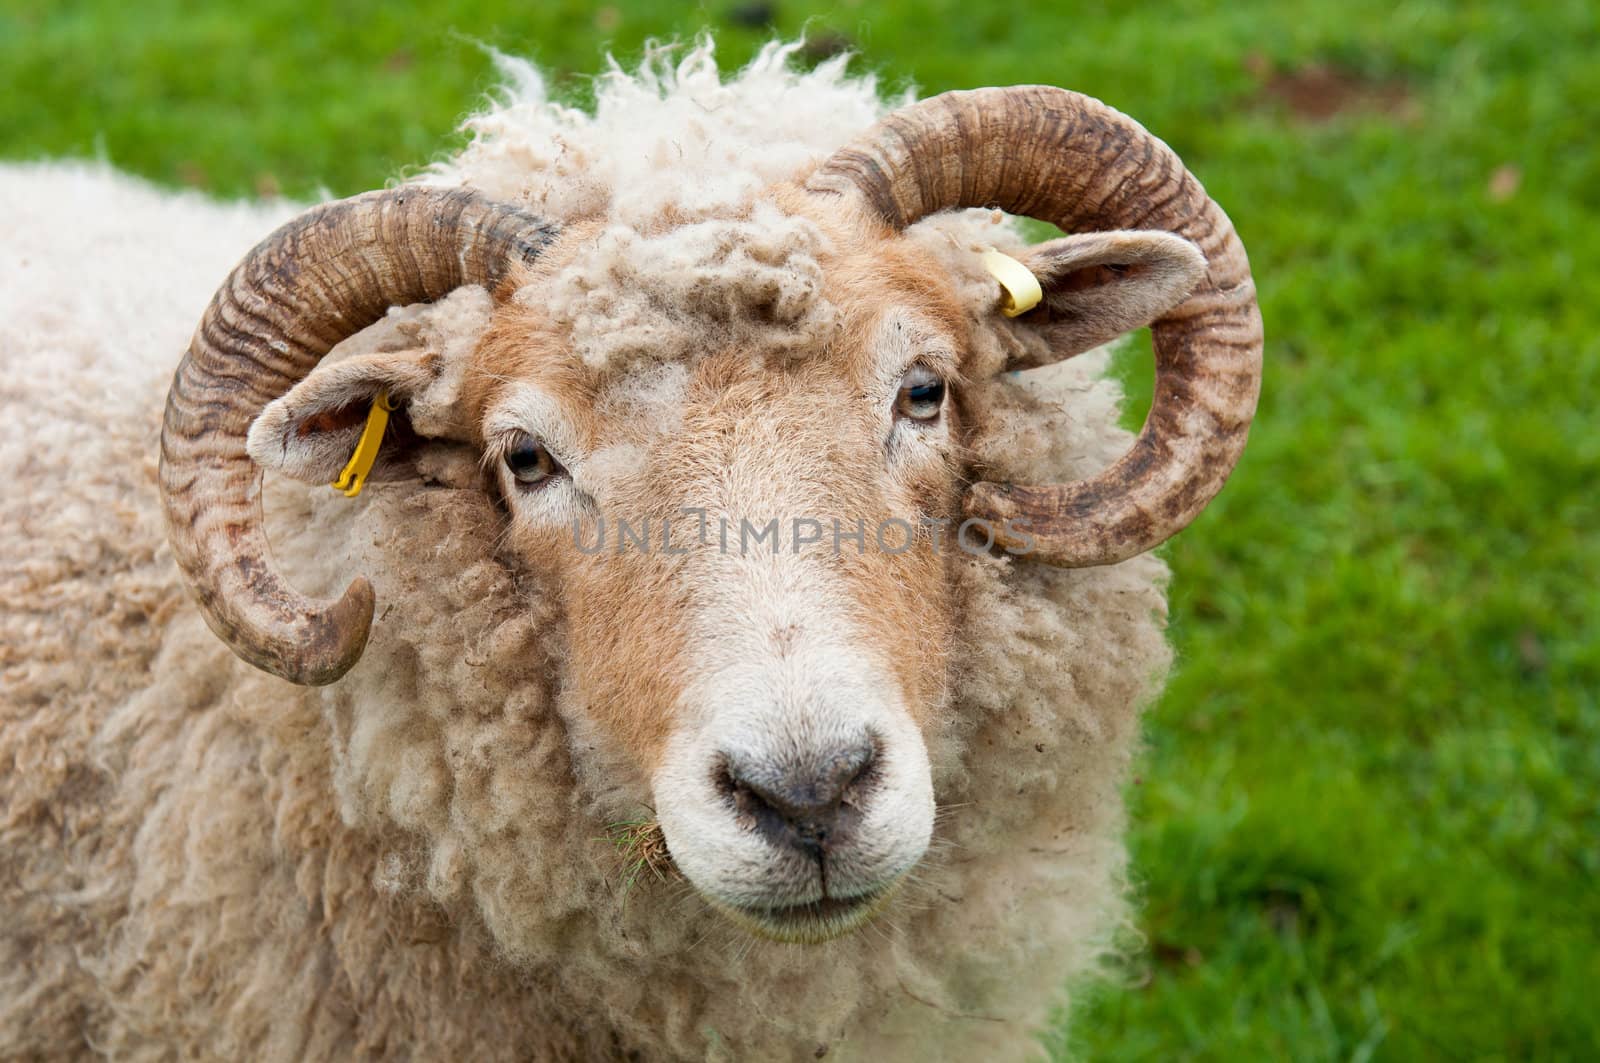 sweet sheep with horns, frontal portrait against a green grass background